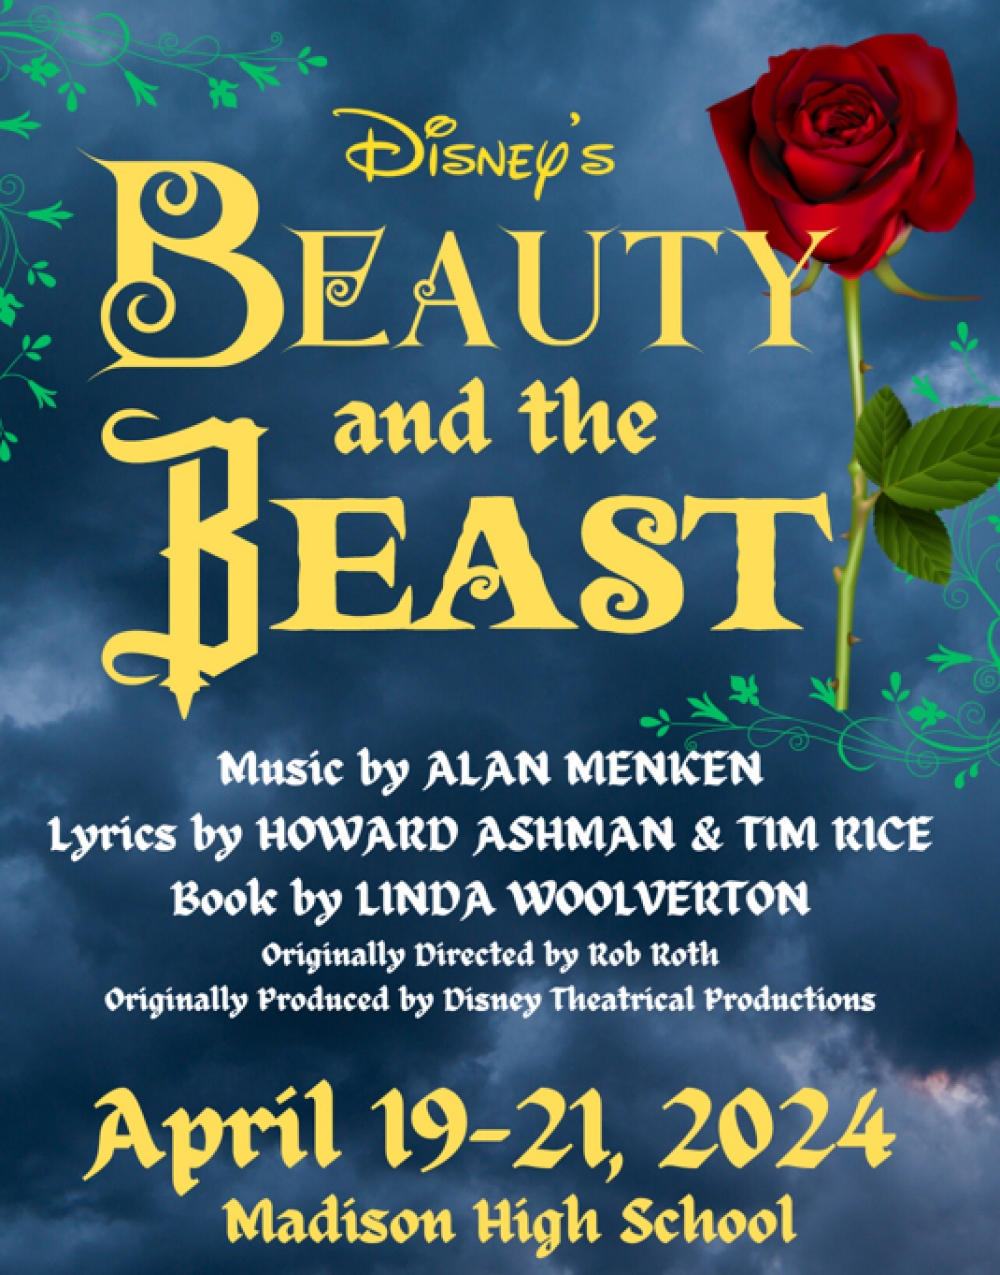 Disney's Beauty and the Beast - Madison High School Theatre Stage Mag